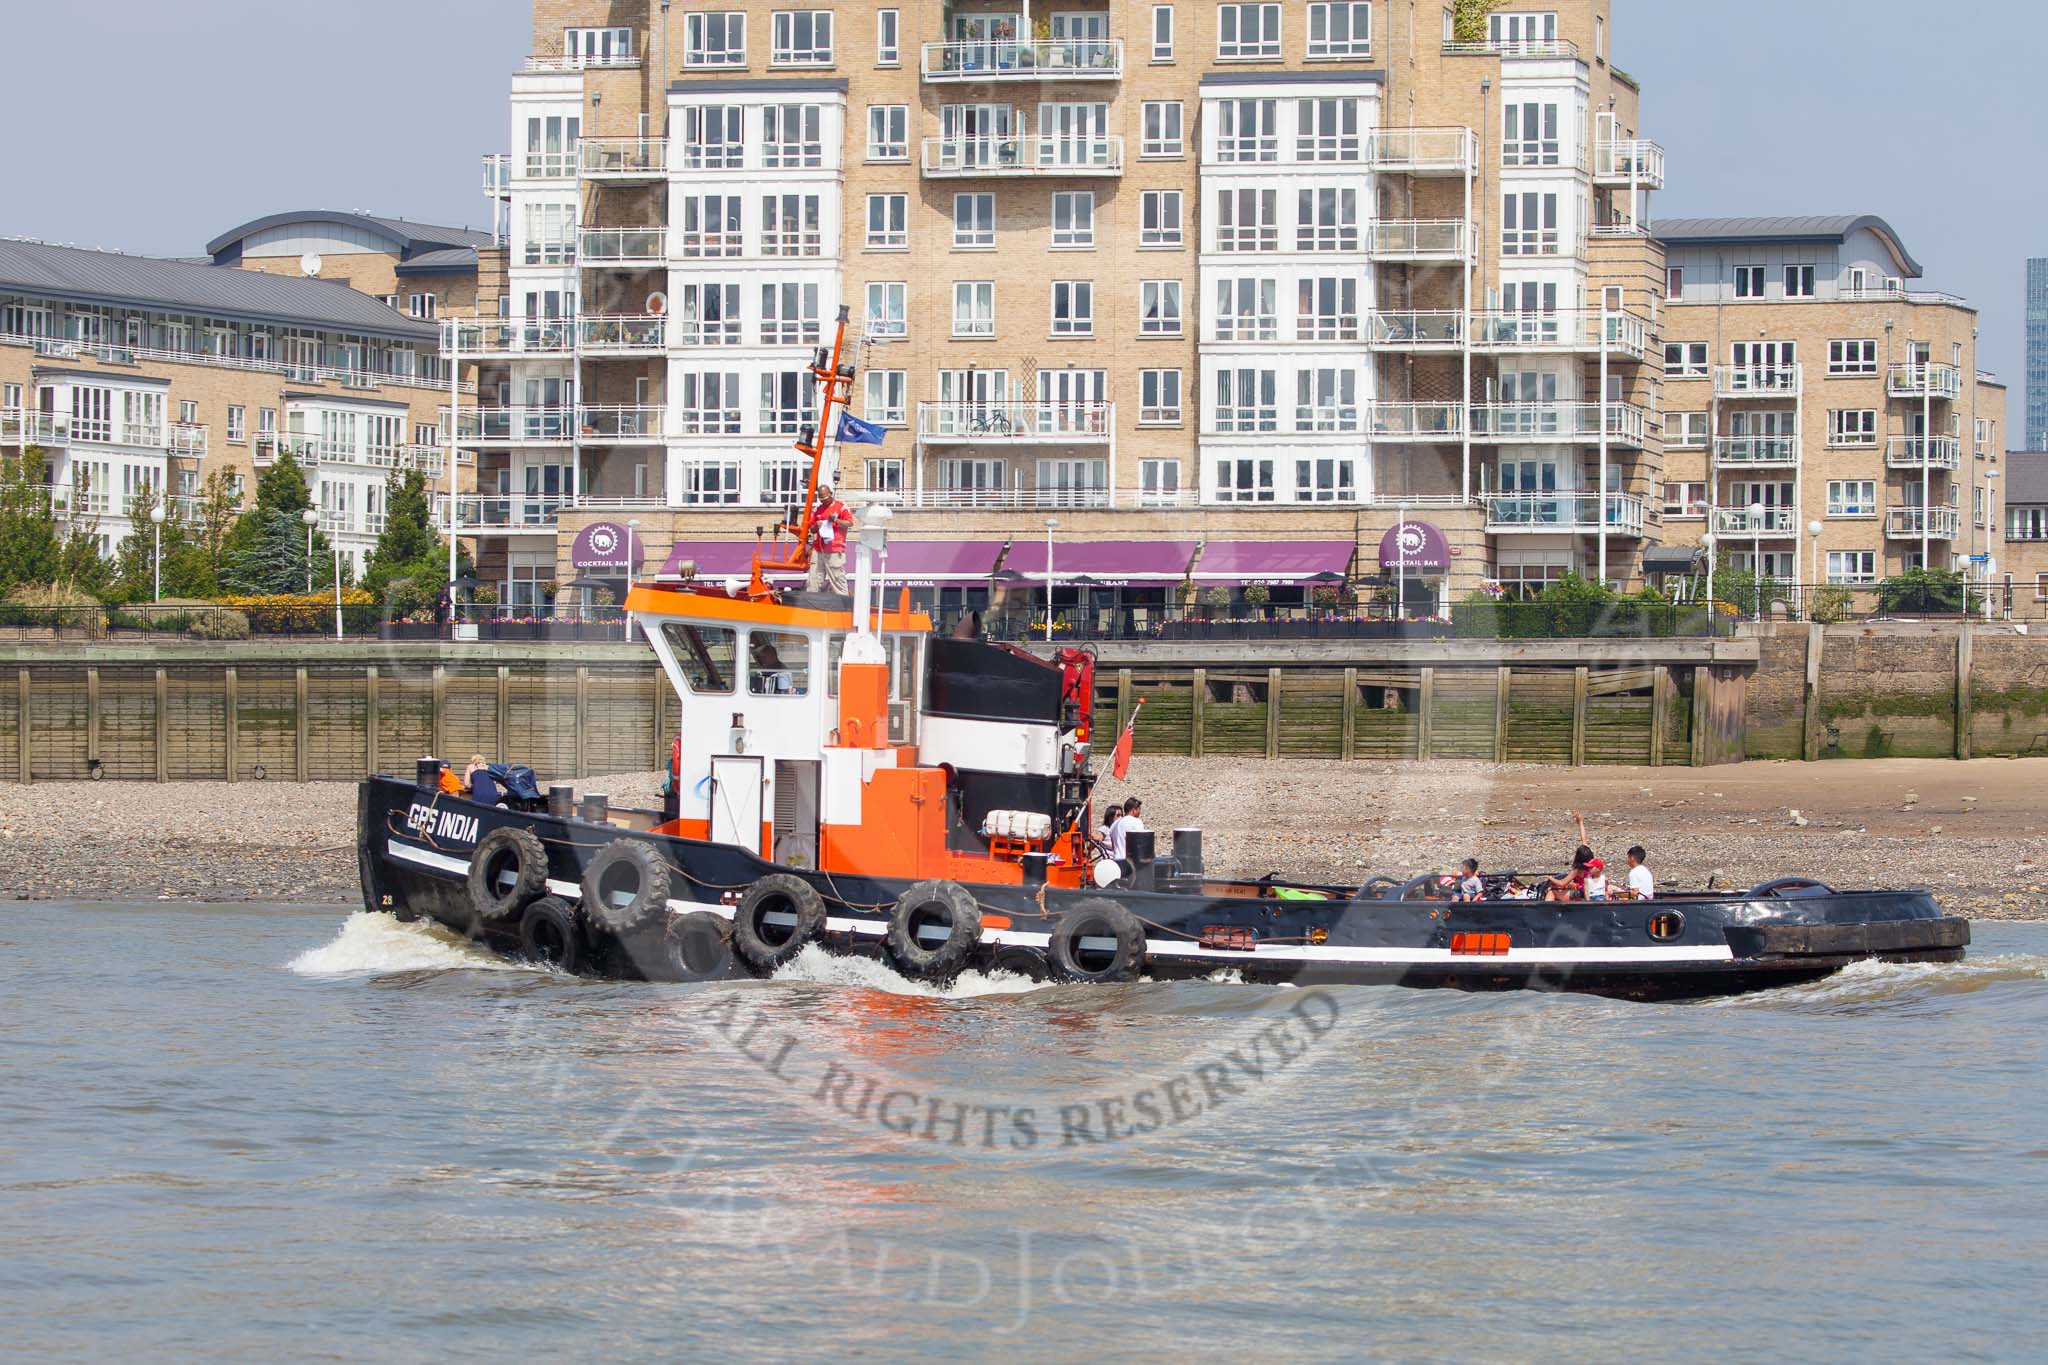 TOW River Thames Barge Driving Race 2013: GPS Marine tug "GPS India" before the start of the race..
River Thames between Greenwich and Westminster,
London,

United Kingdom,
on 13 July 2013 at 11:46, image #39